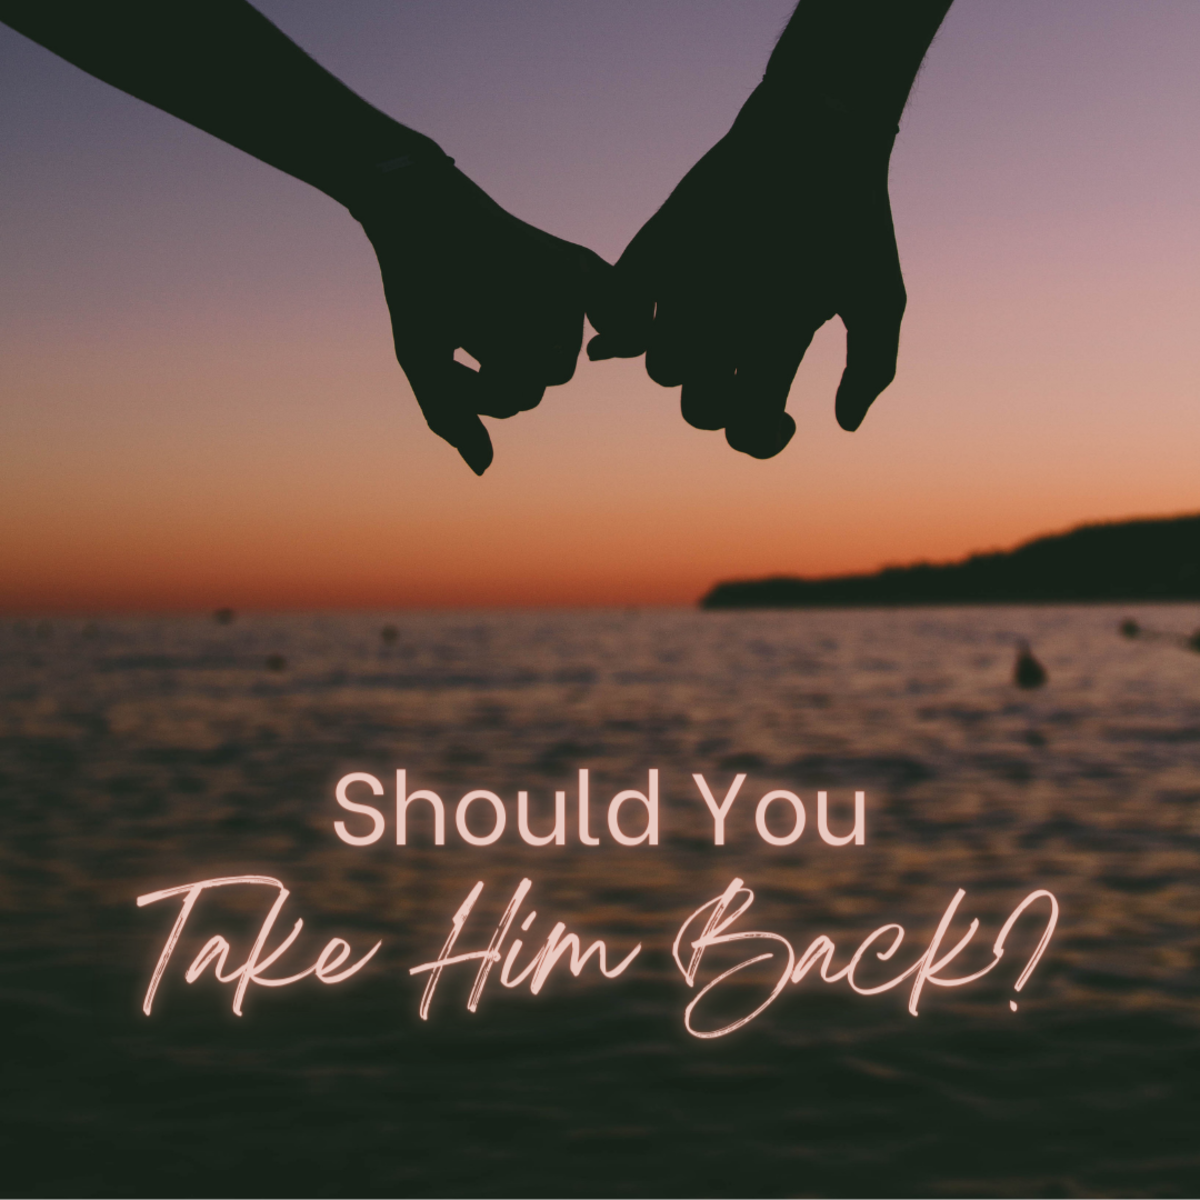 Should you get back together with your ex? Read on to find out!